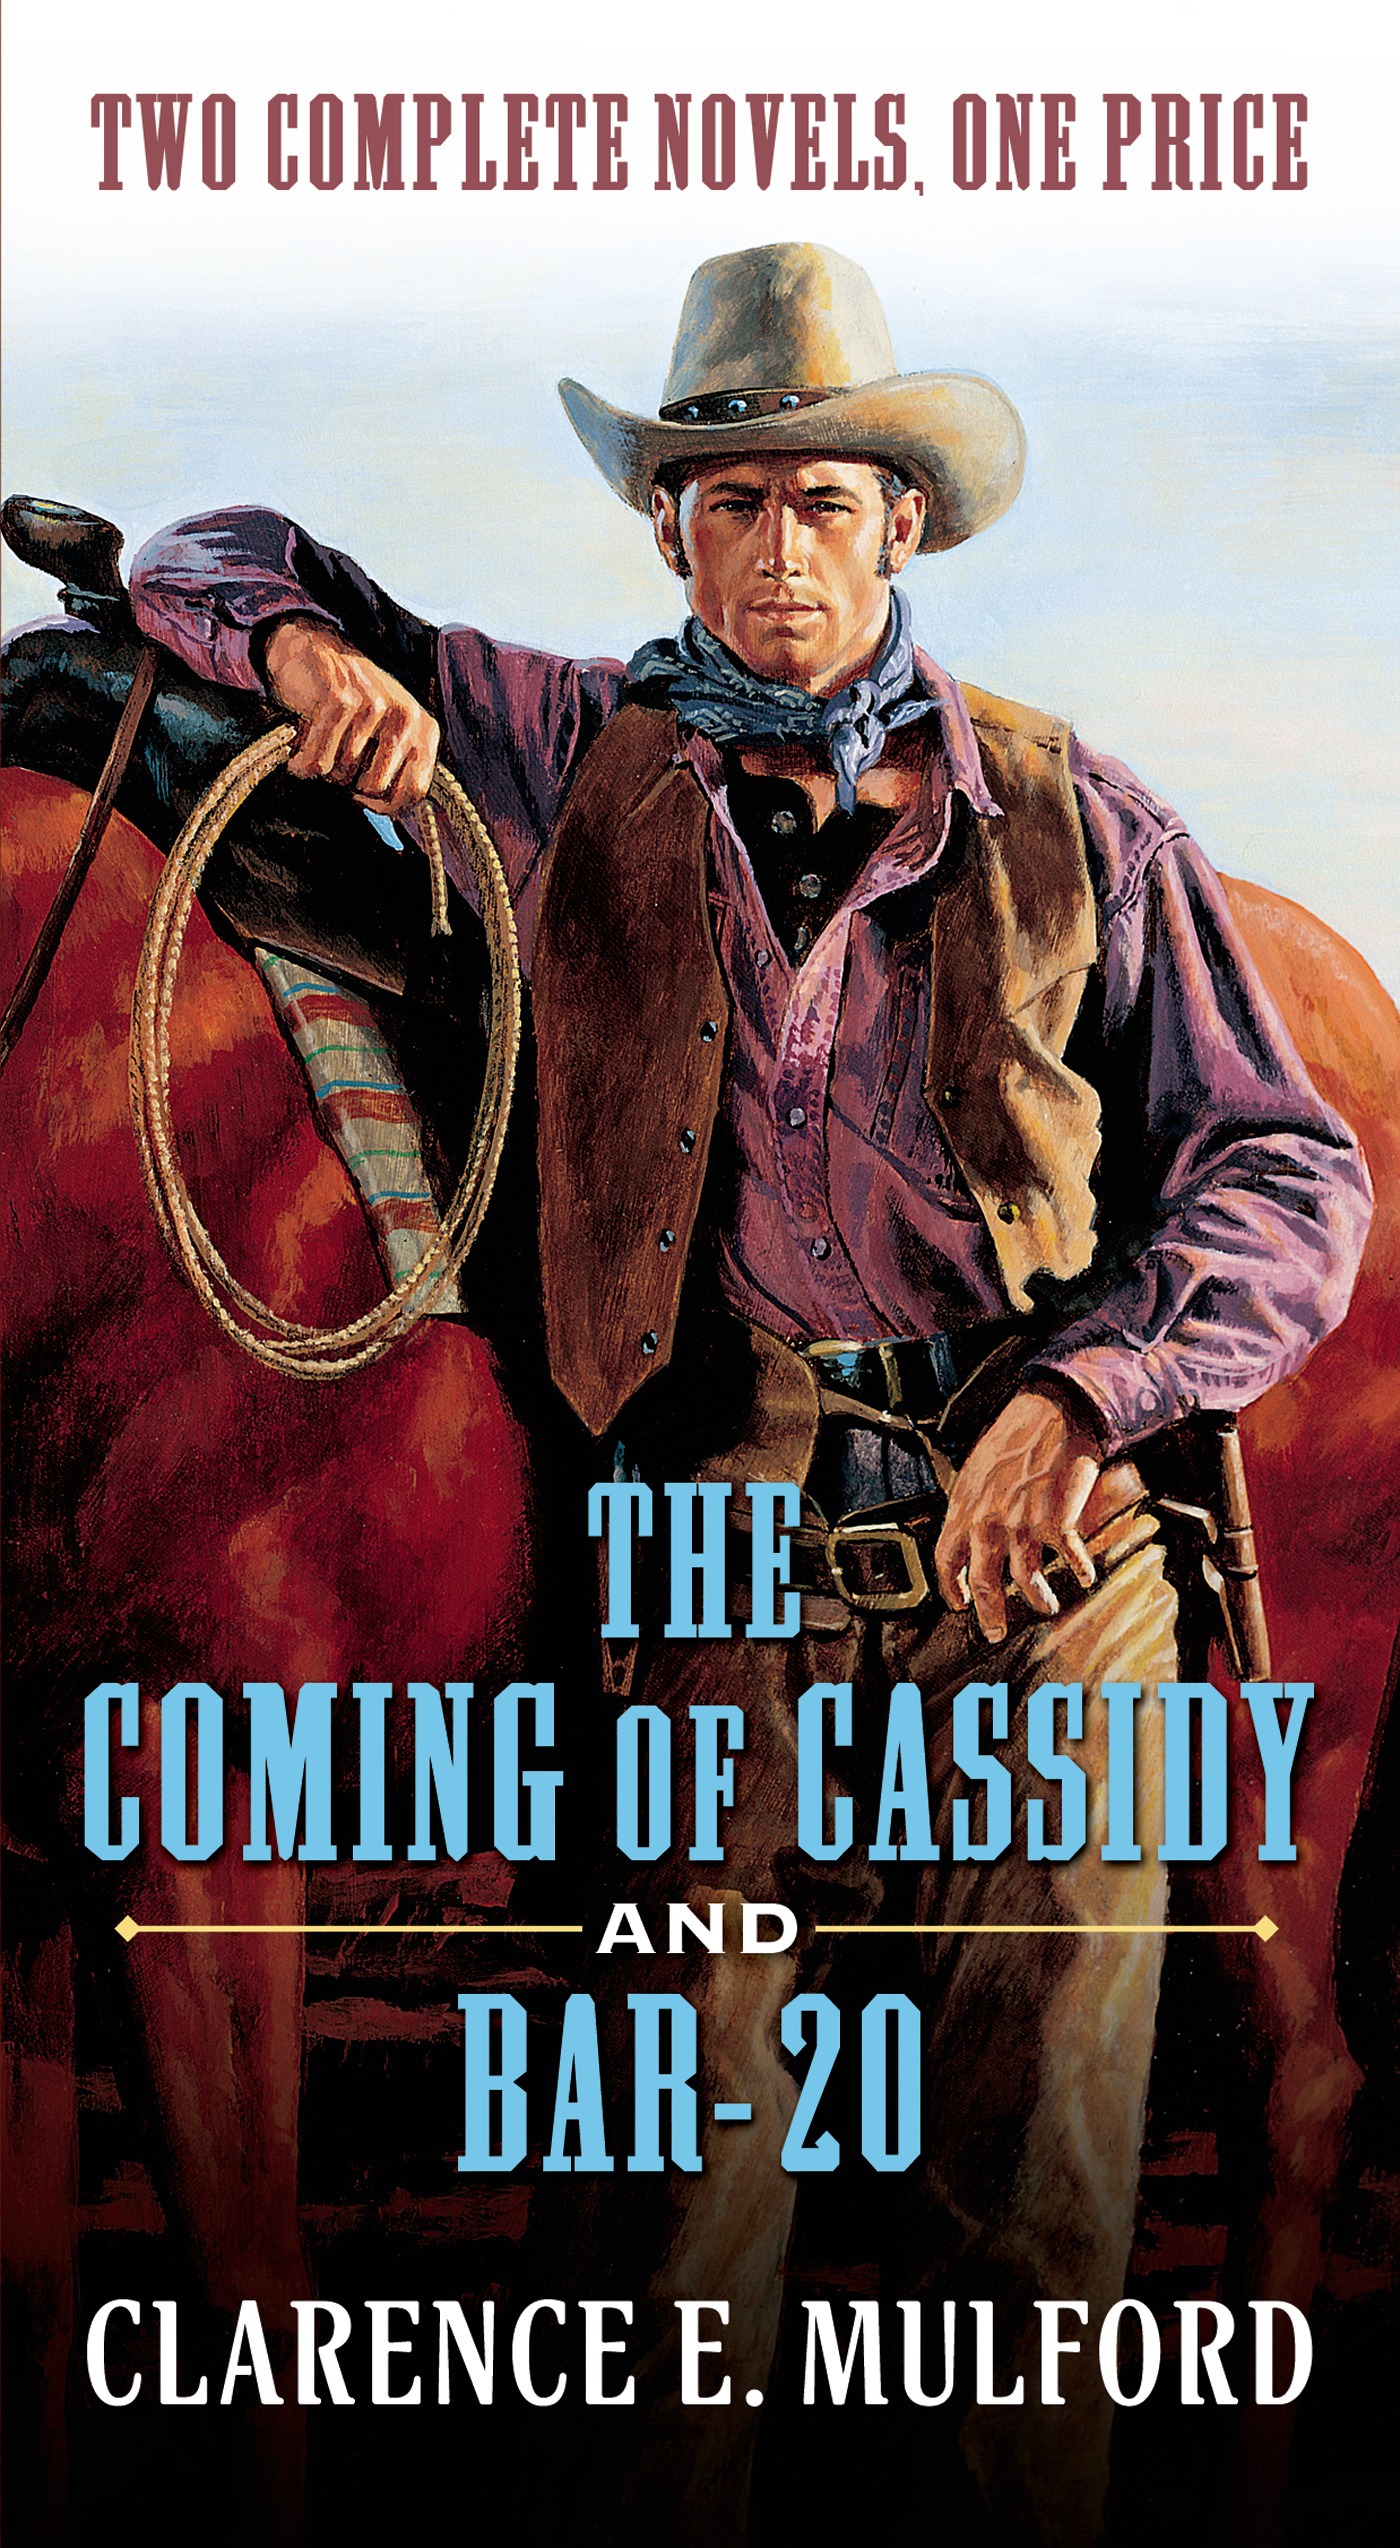 The Coming of Cassidy and Bar-20 : Two Complete Hopalong Cassidy Novels by Clarence E. Mulford